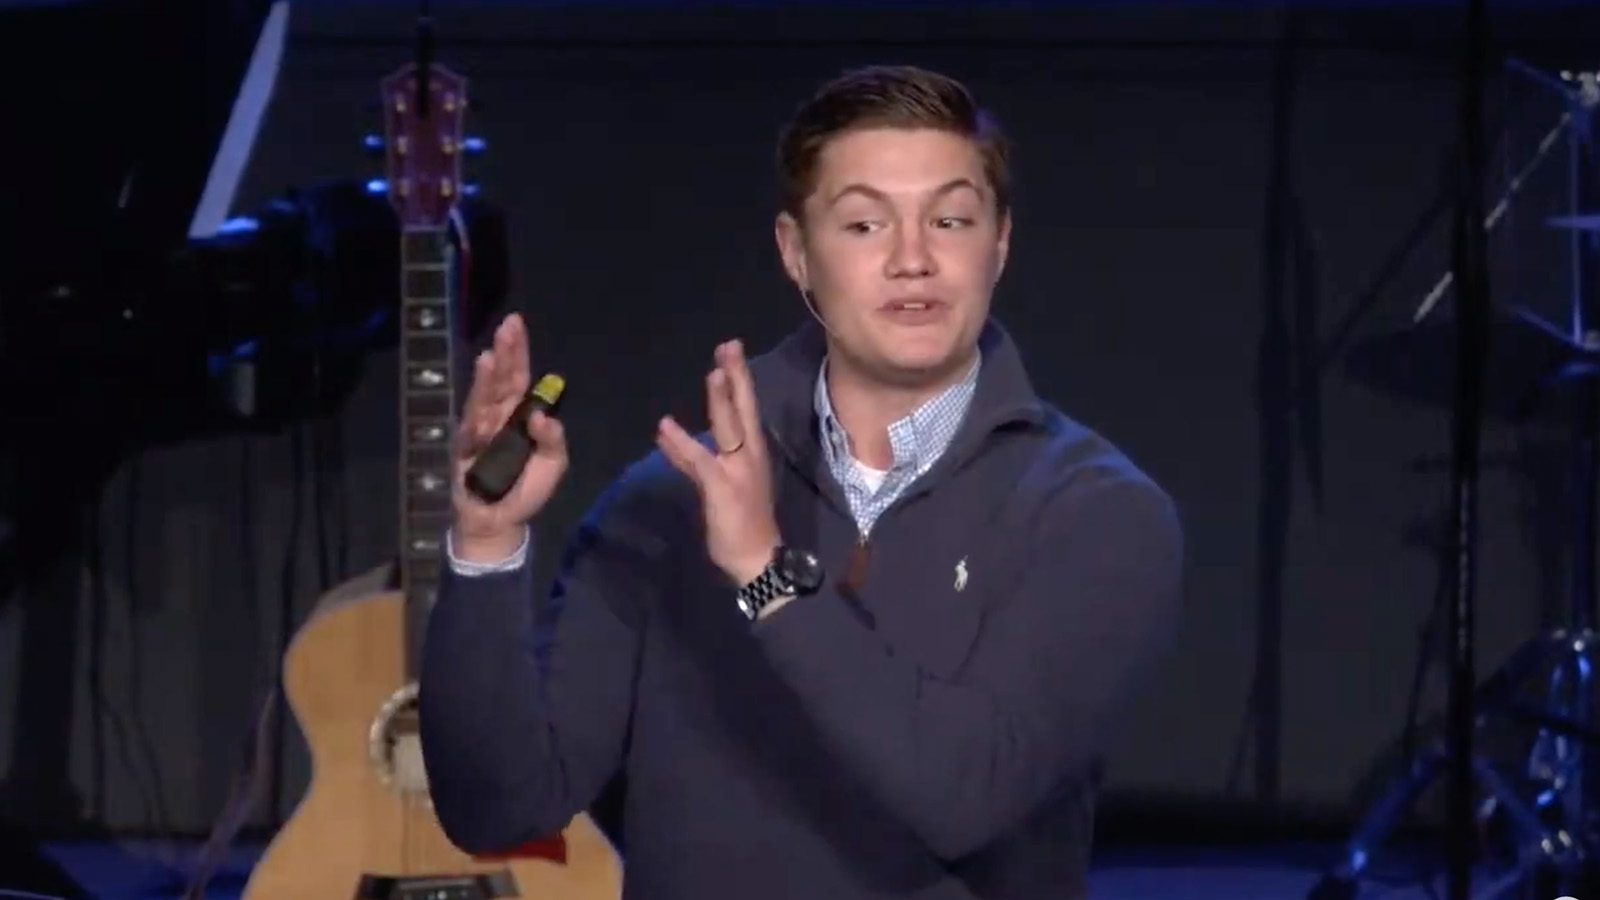 Pastor Cooper Young preaches at Crossroads Community Church in Chittenango, New York, on Dec. 19, 2021. Video screengrab